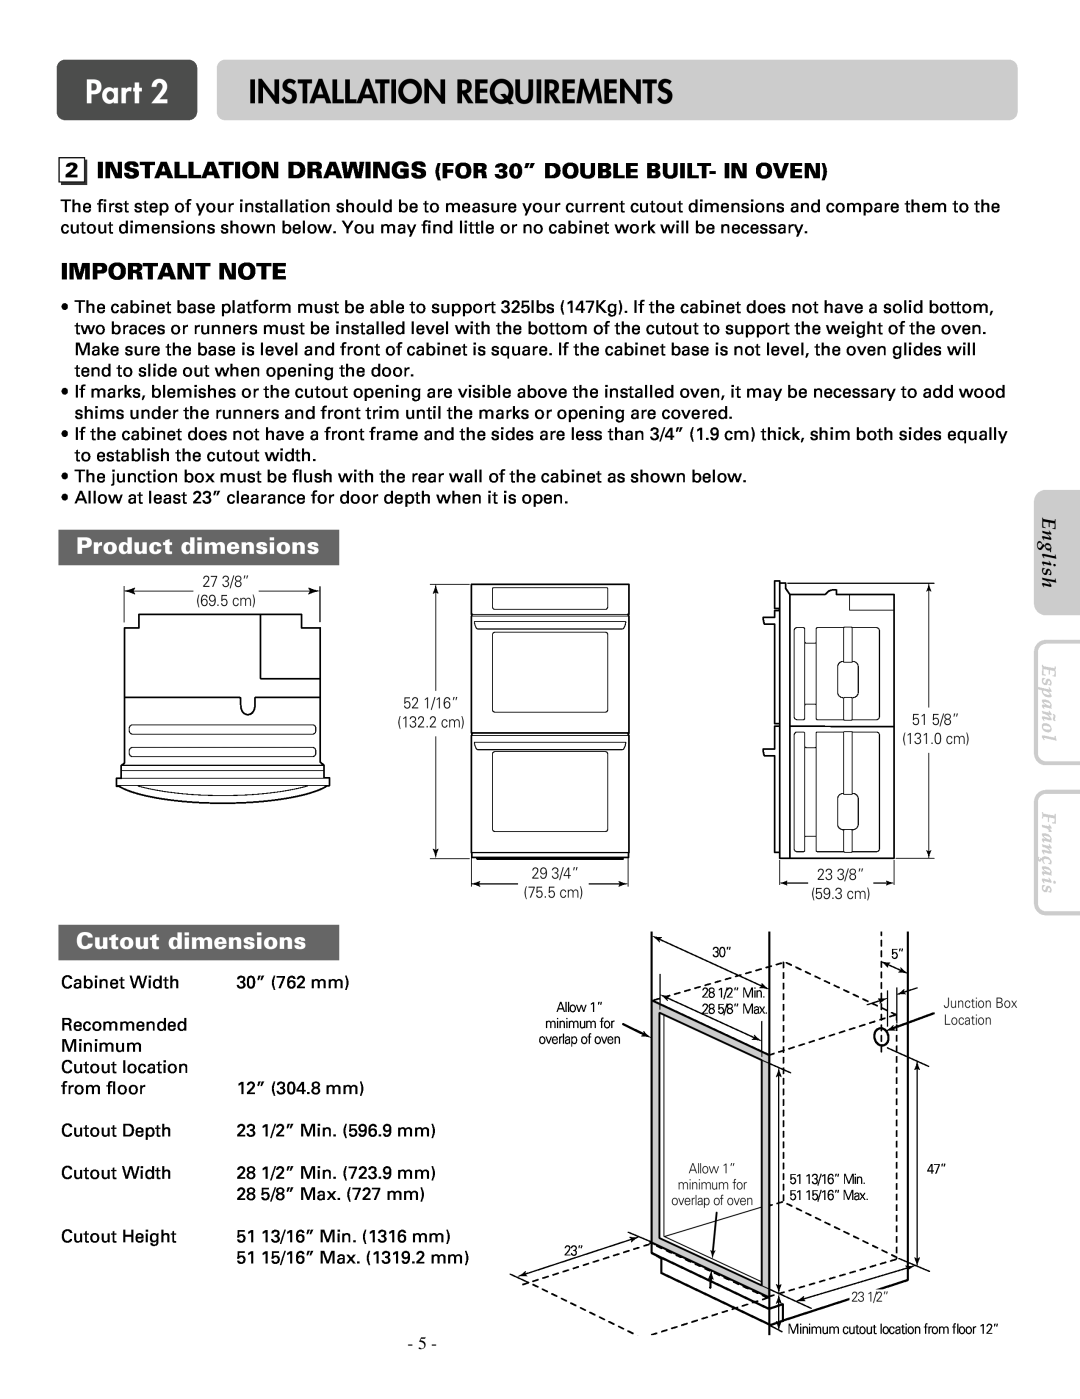 LG Electronics LWD3081ST INSTALLATION DRAWINGS FOR 30” DOUBLE BUILT- IN OVEN, Part 2 INSTALLATION REQUIREMENTS, English 